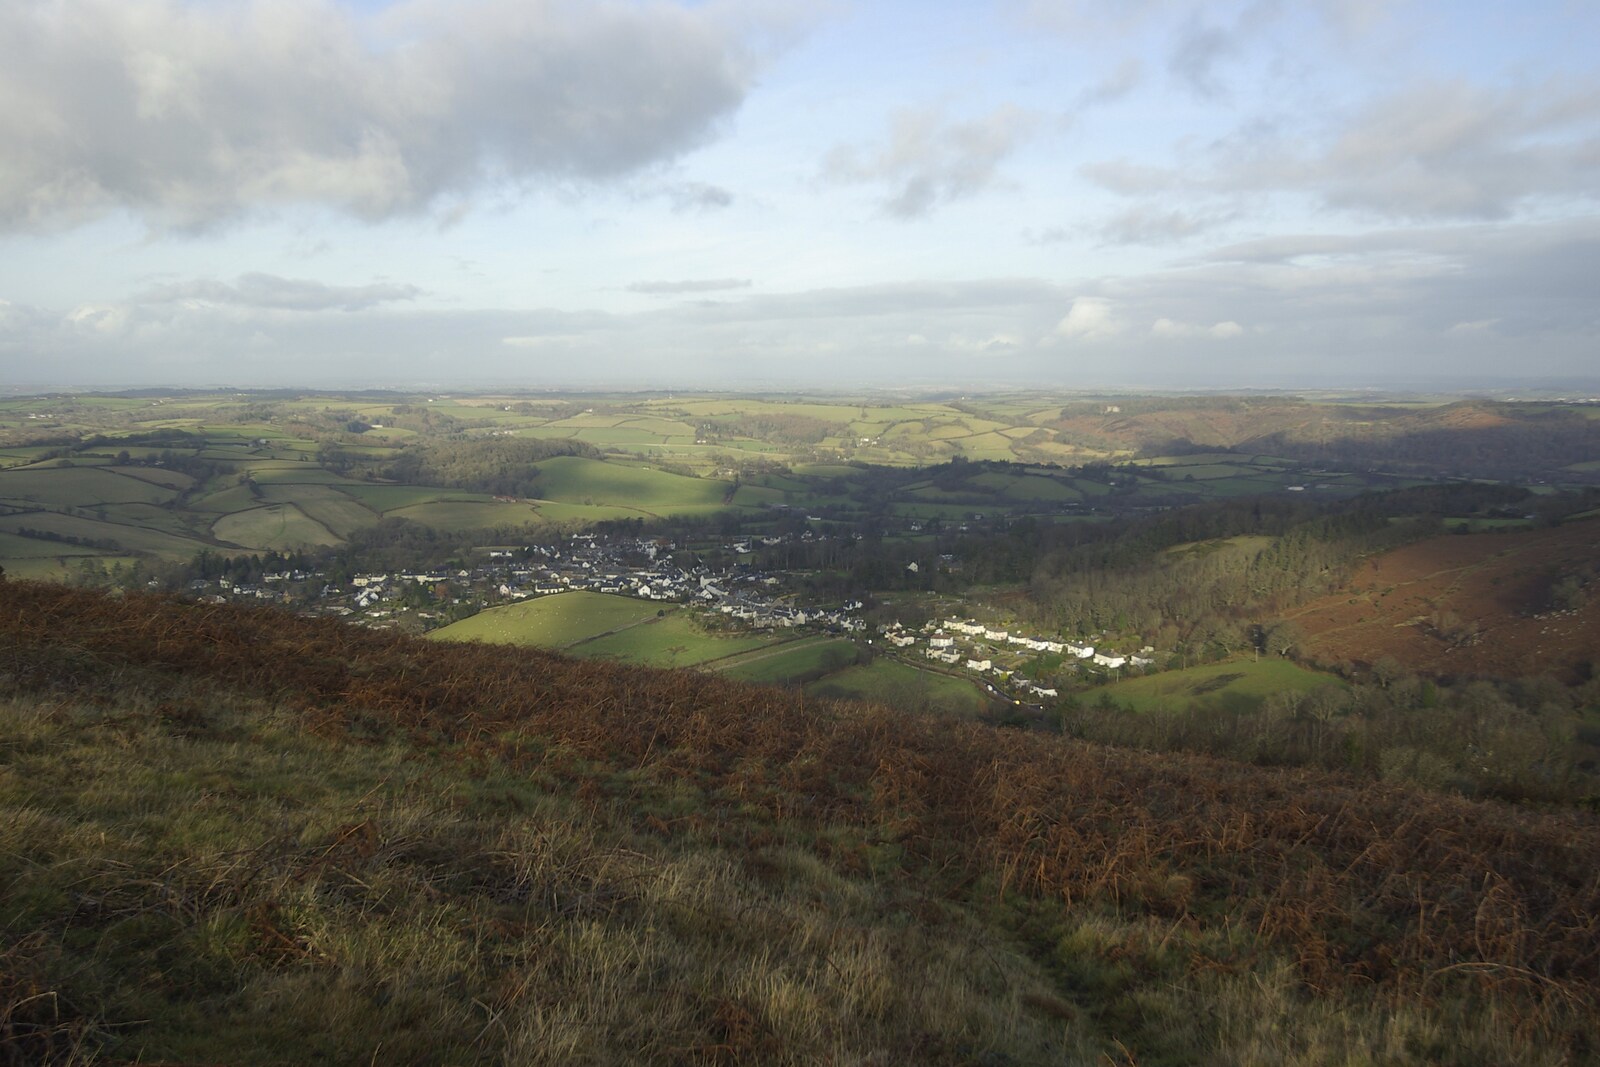 The town of Chagford viewed from Meldon Hill from Matt's Allotment and Meldon Hill, Chagford, Devon - 26th December 2007